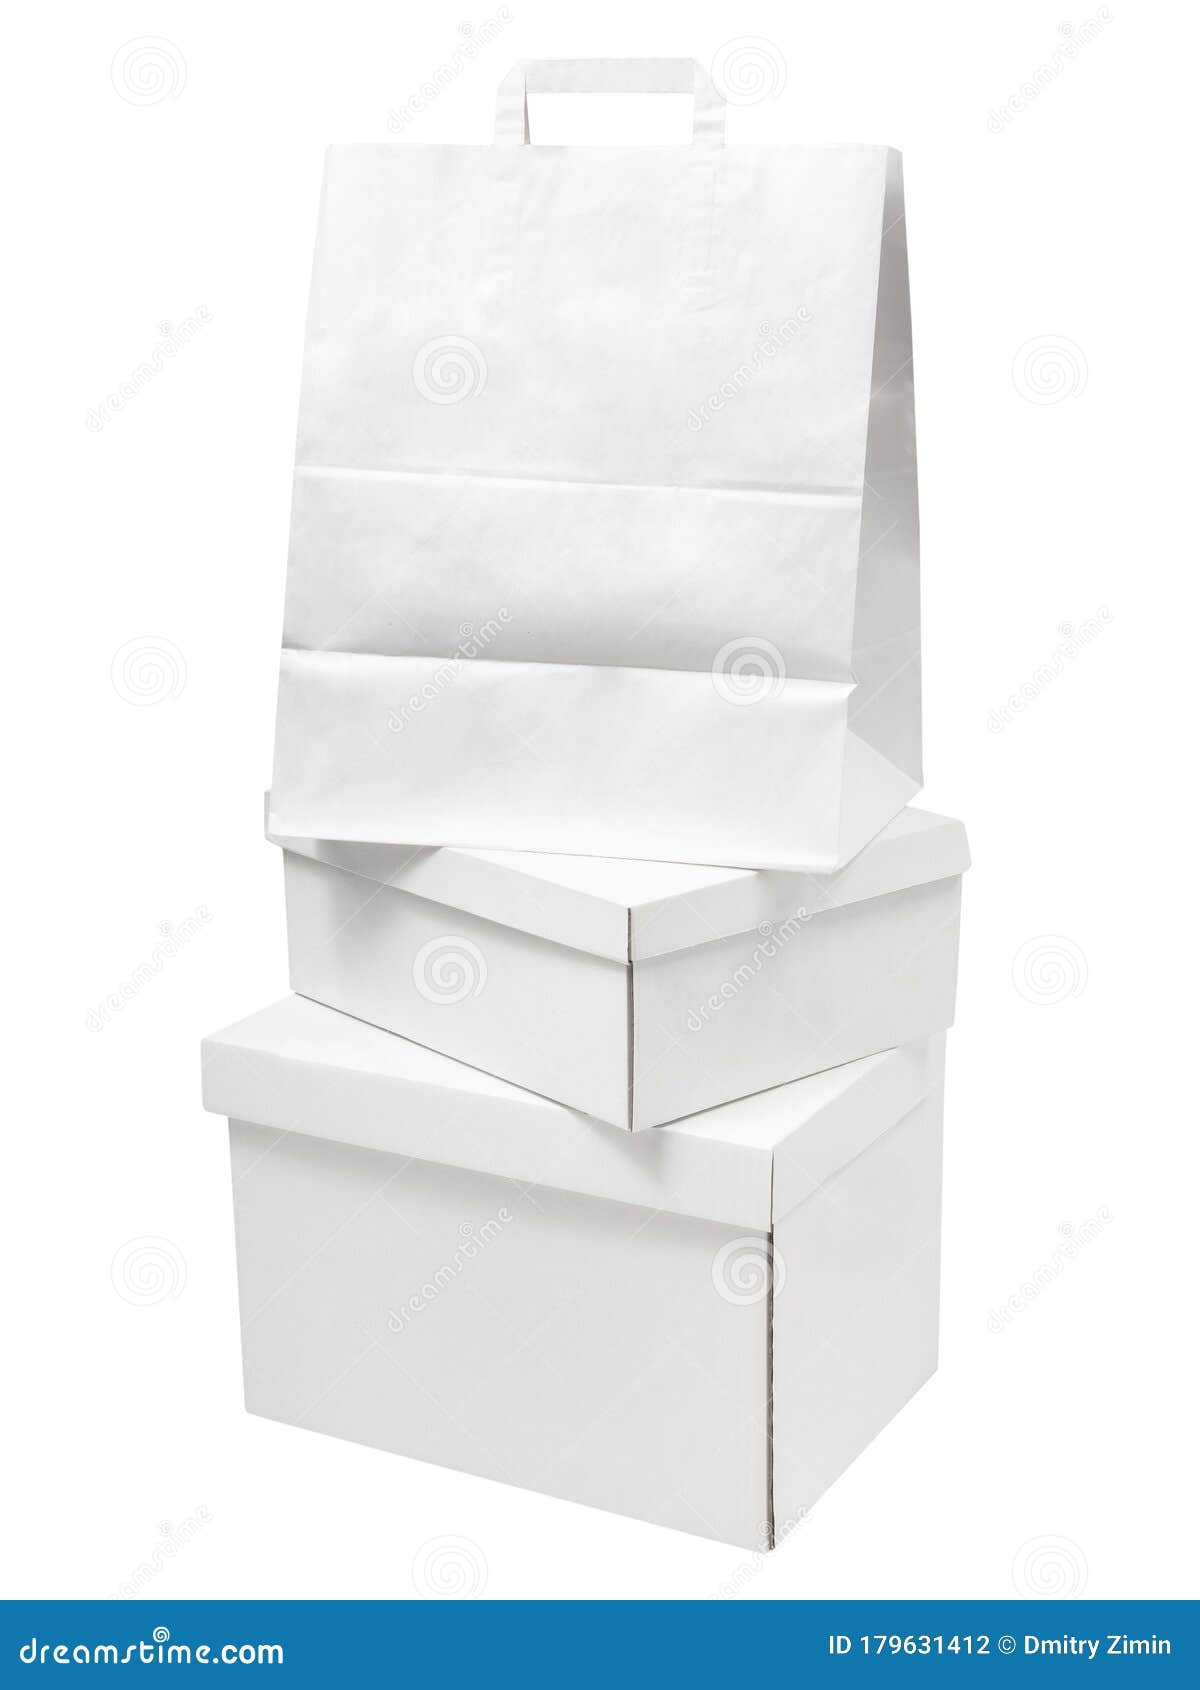 Pile of Blank White Paper Boxes and Paper Bag Packages Isolated on White Background Stock Photo - Image of parcel, 179631412